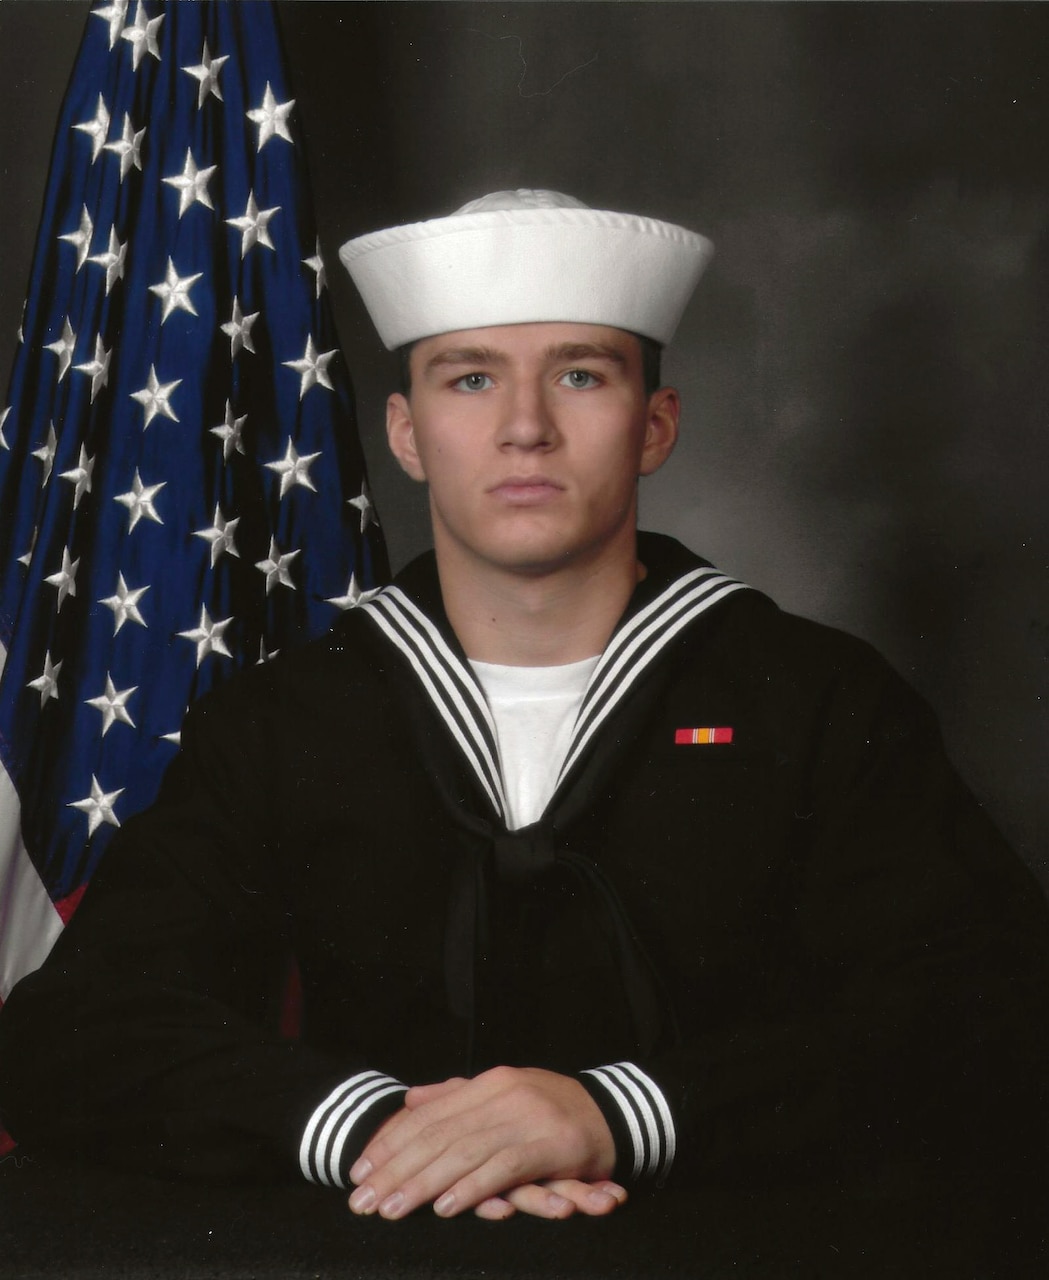 An undated portrait of Navy Corpsman Maxton W. Soviak during recruit training released by his family. Soviak was killed during an attack at the Abbey Gate of Hamid Karzai International Airport in Kabul, Afghanistan, August 26, 2021.